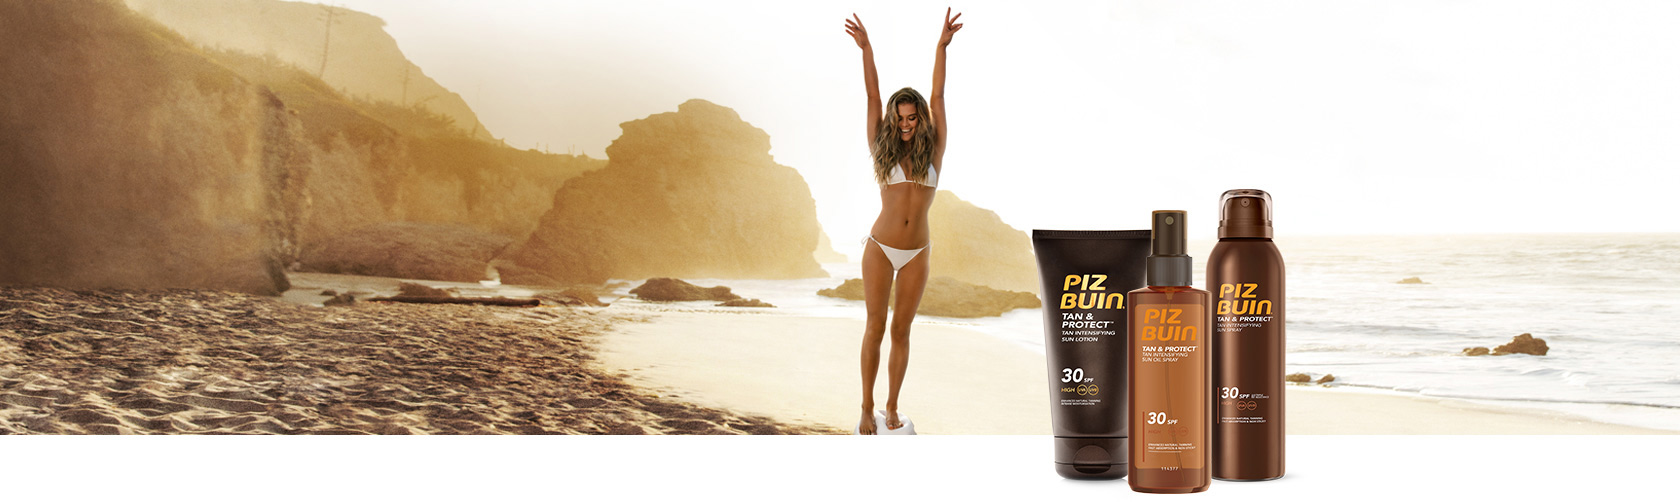 Erobrer oprejst bud Protect Your Skin From the Sun | PIZ BUIN®